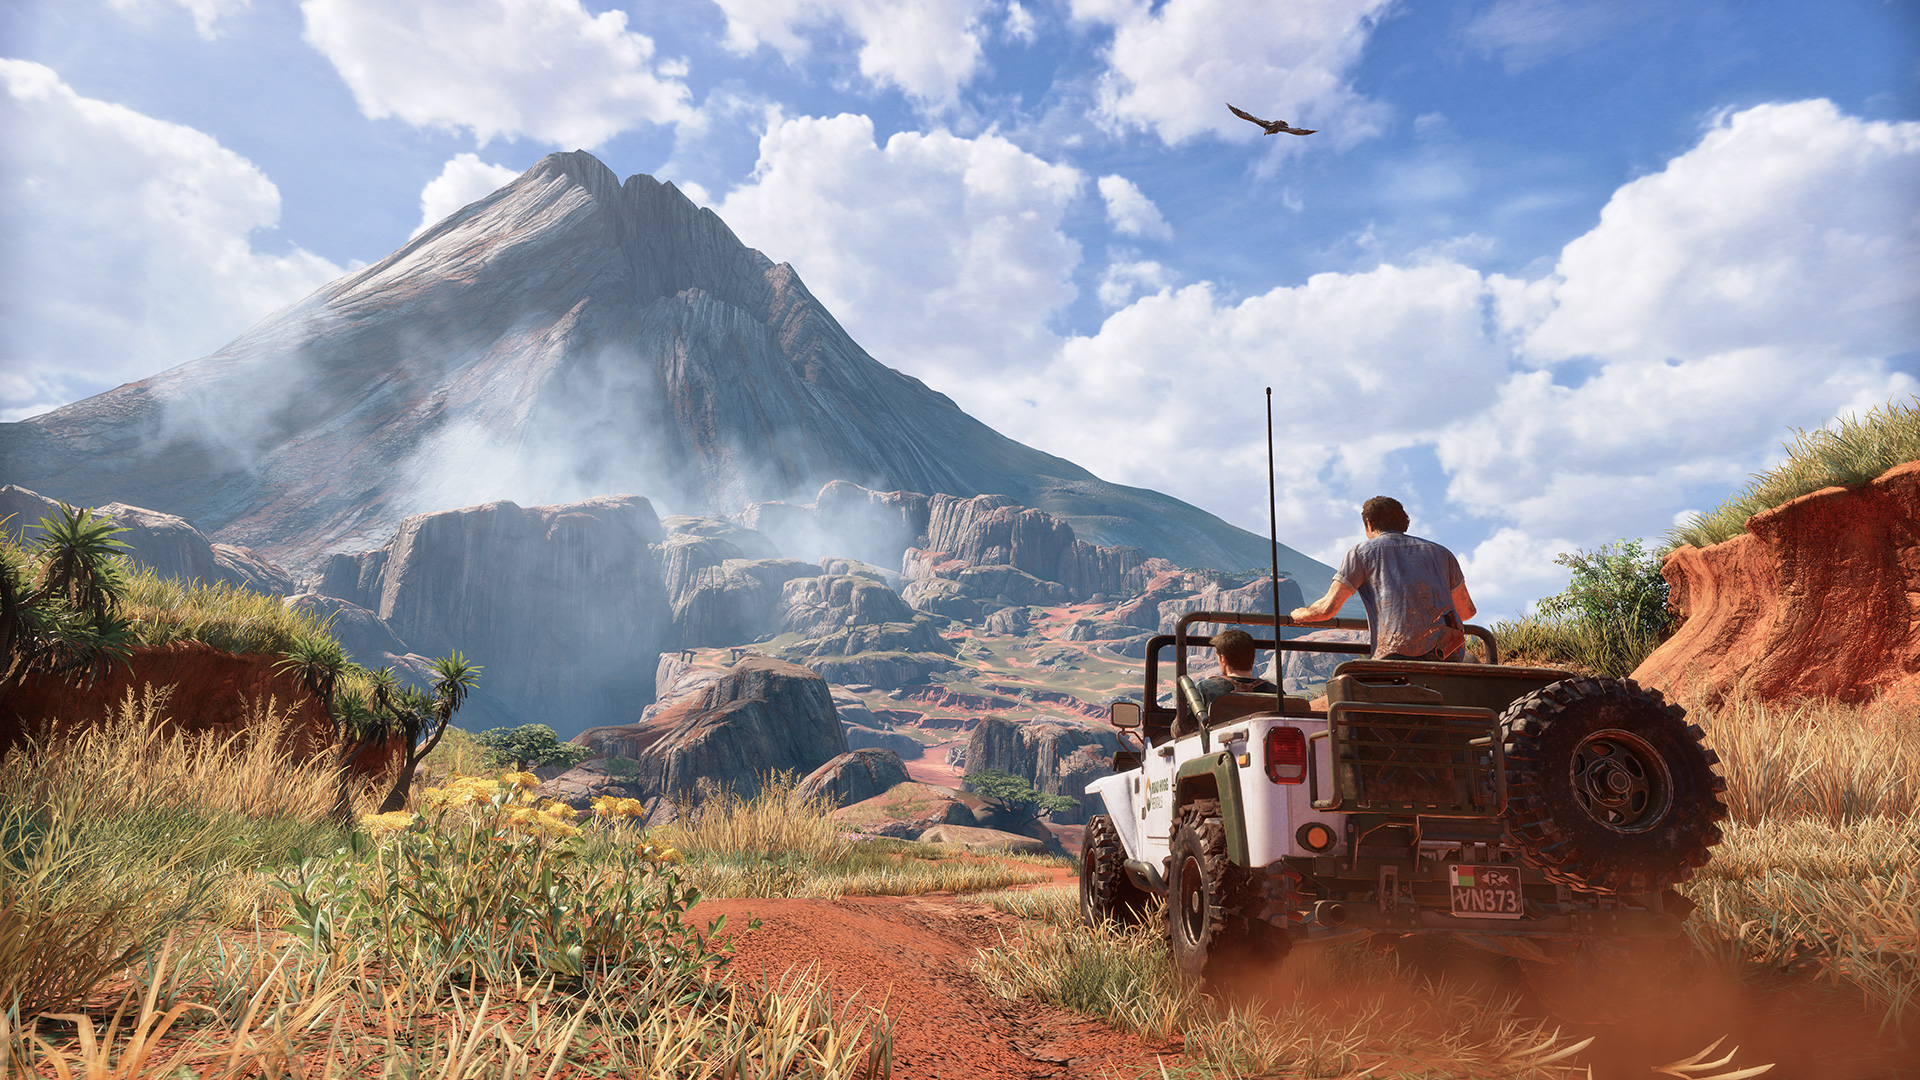 Image result for uncharted 4